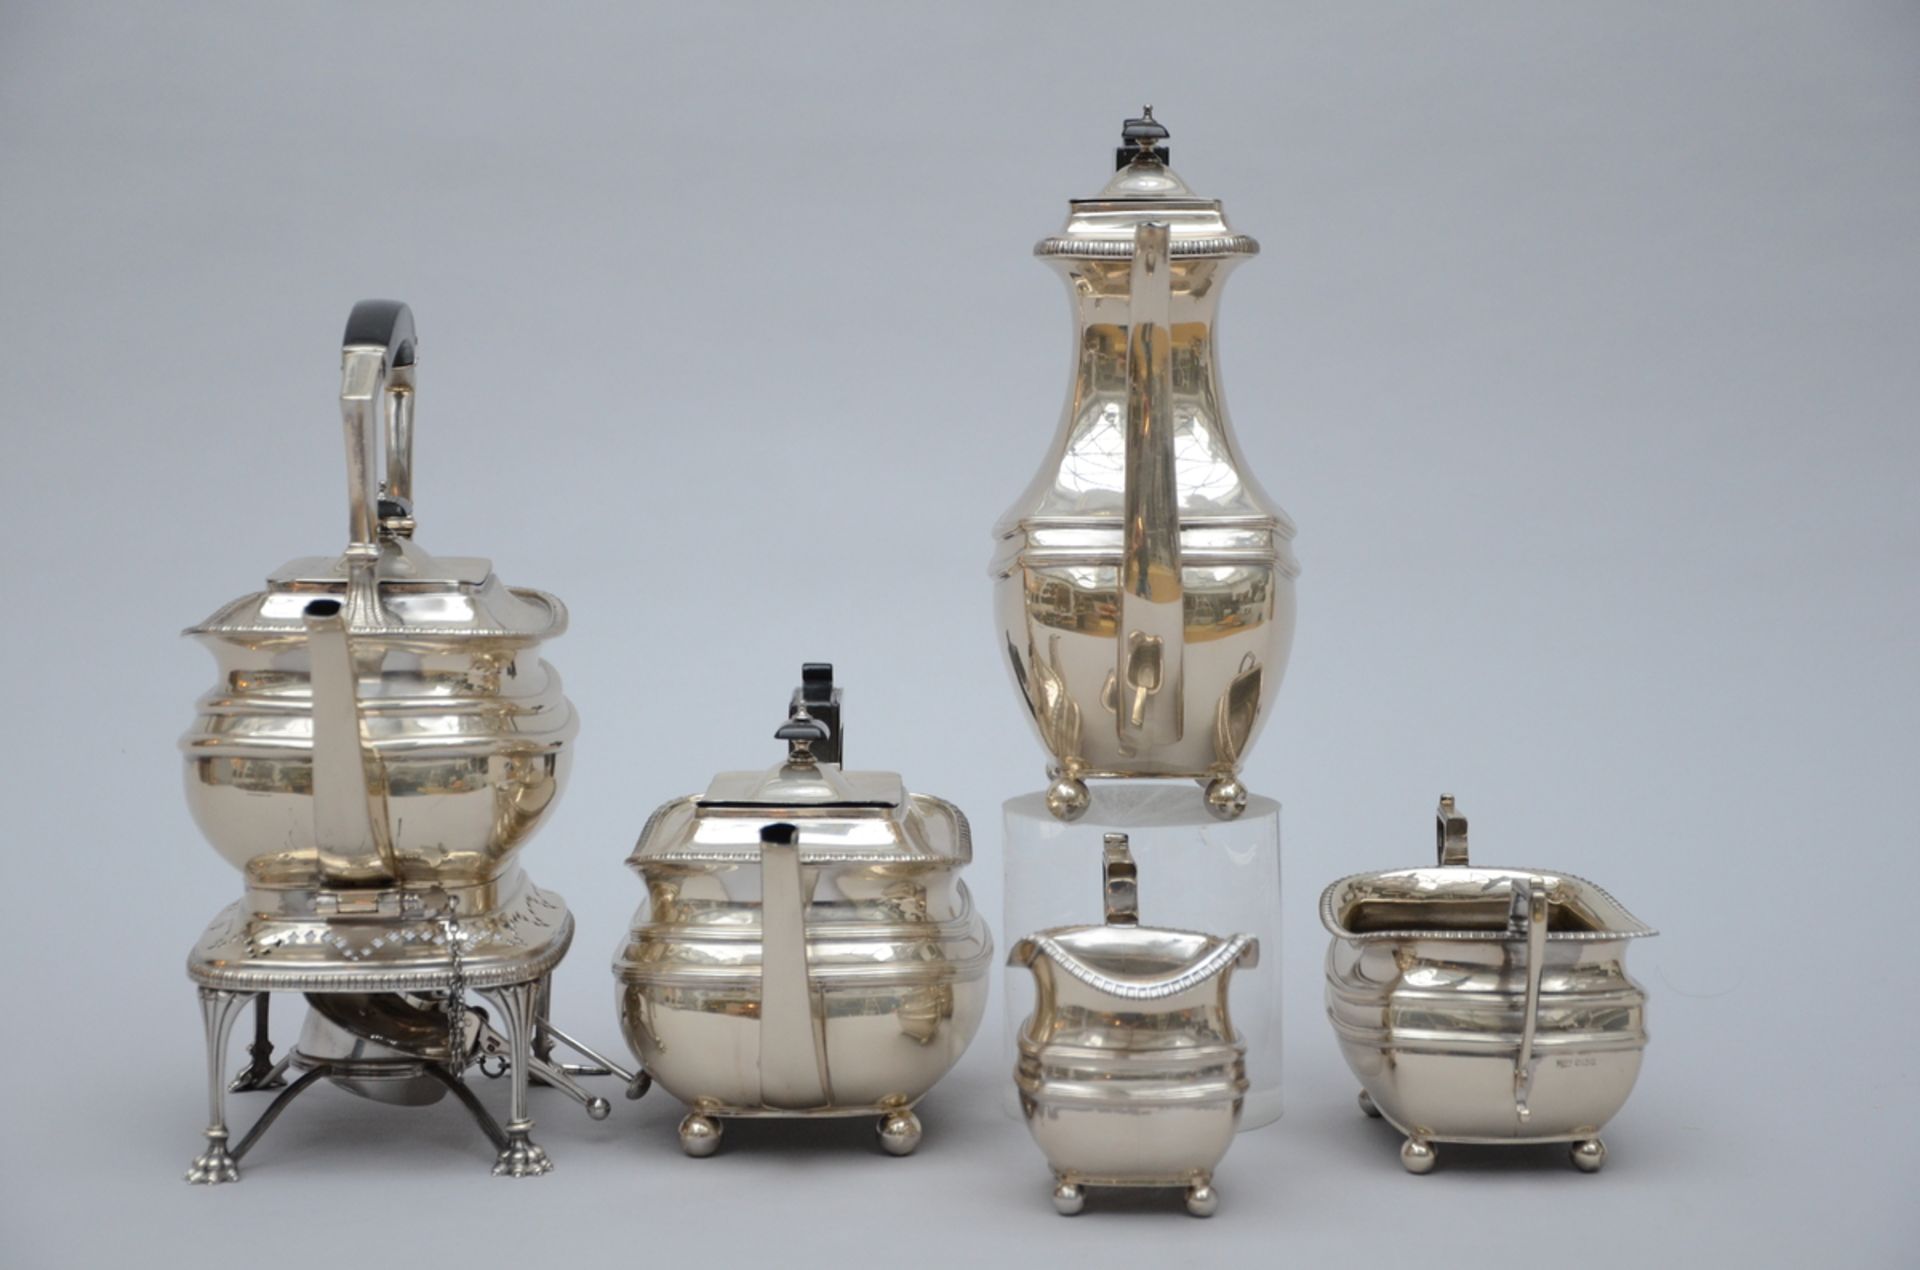 A five-piece coffee set in Sterling silver, United Kingdom - Image 3 of 6